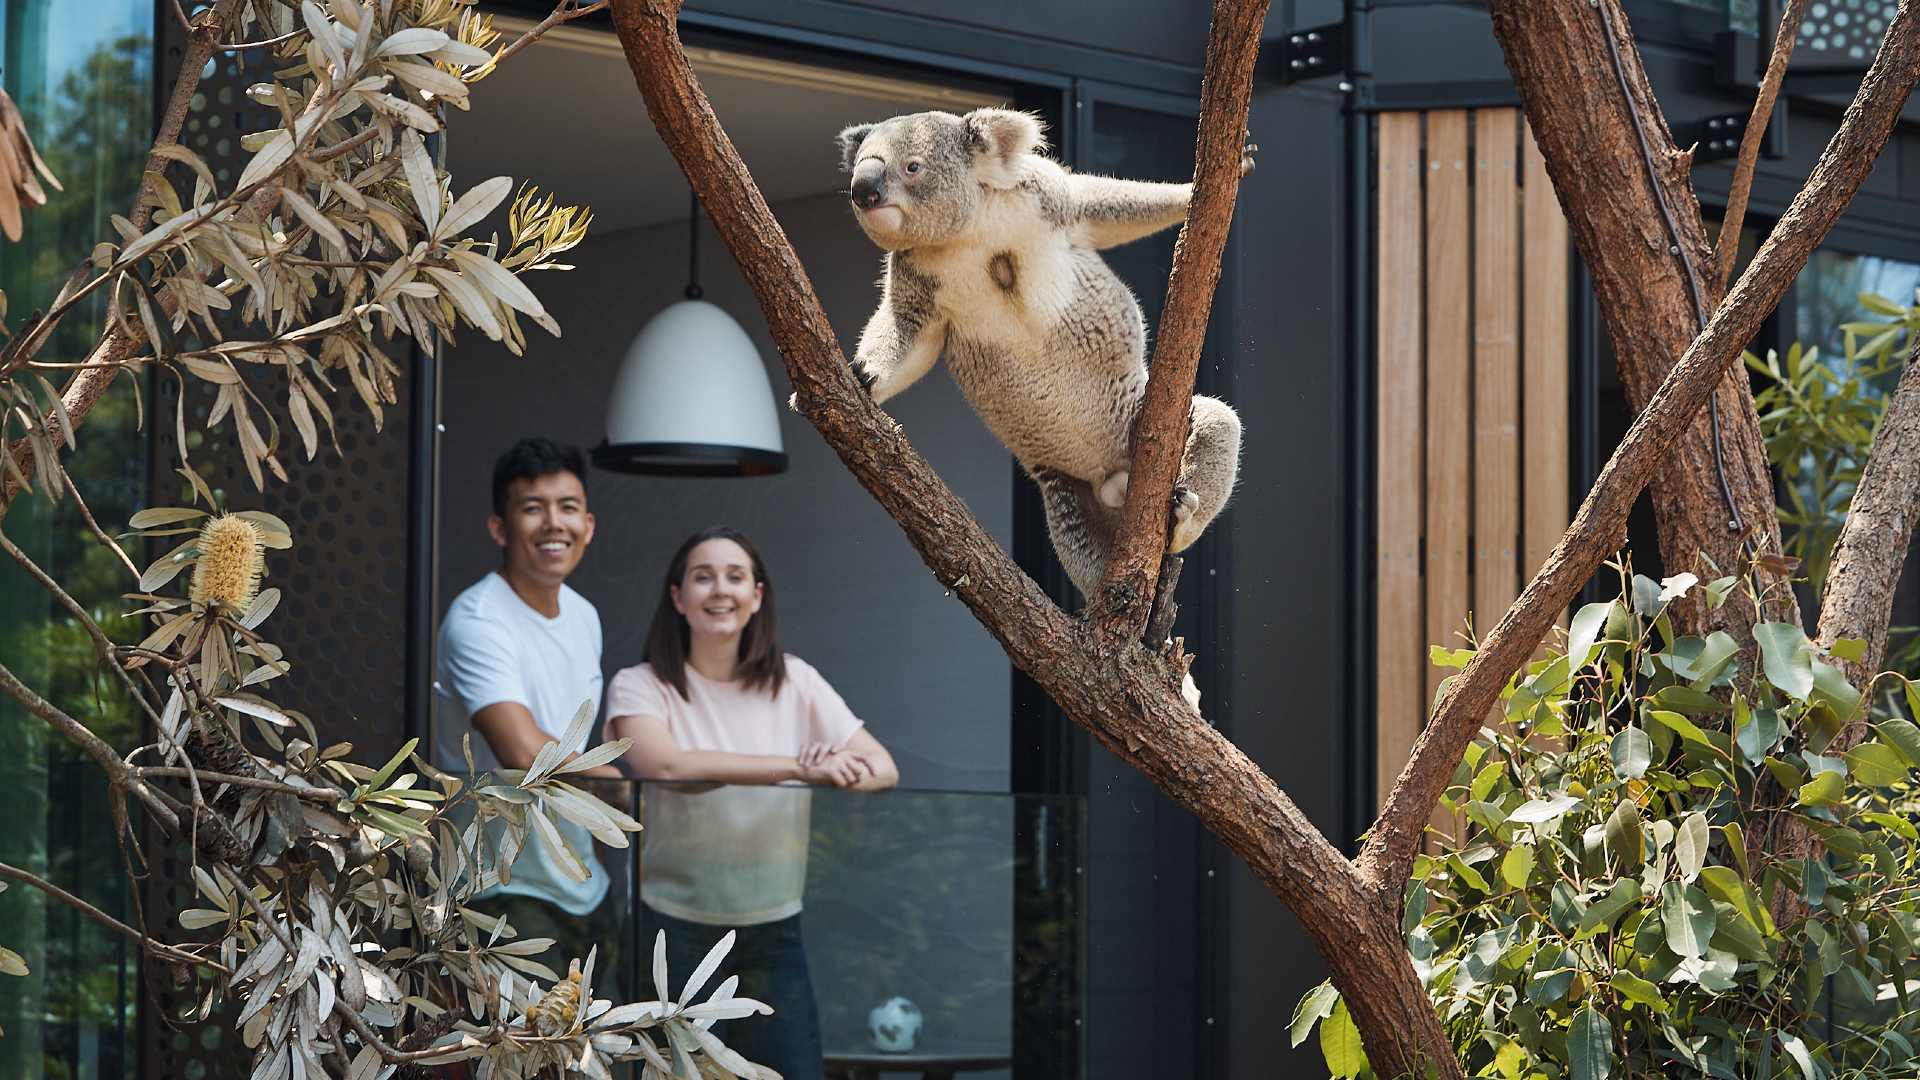 Get Wildin': You Can Wine and Dine Your Way Through Taronga Zoo for Two Nights Only